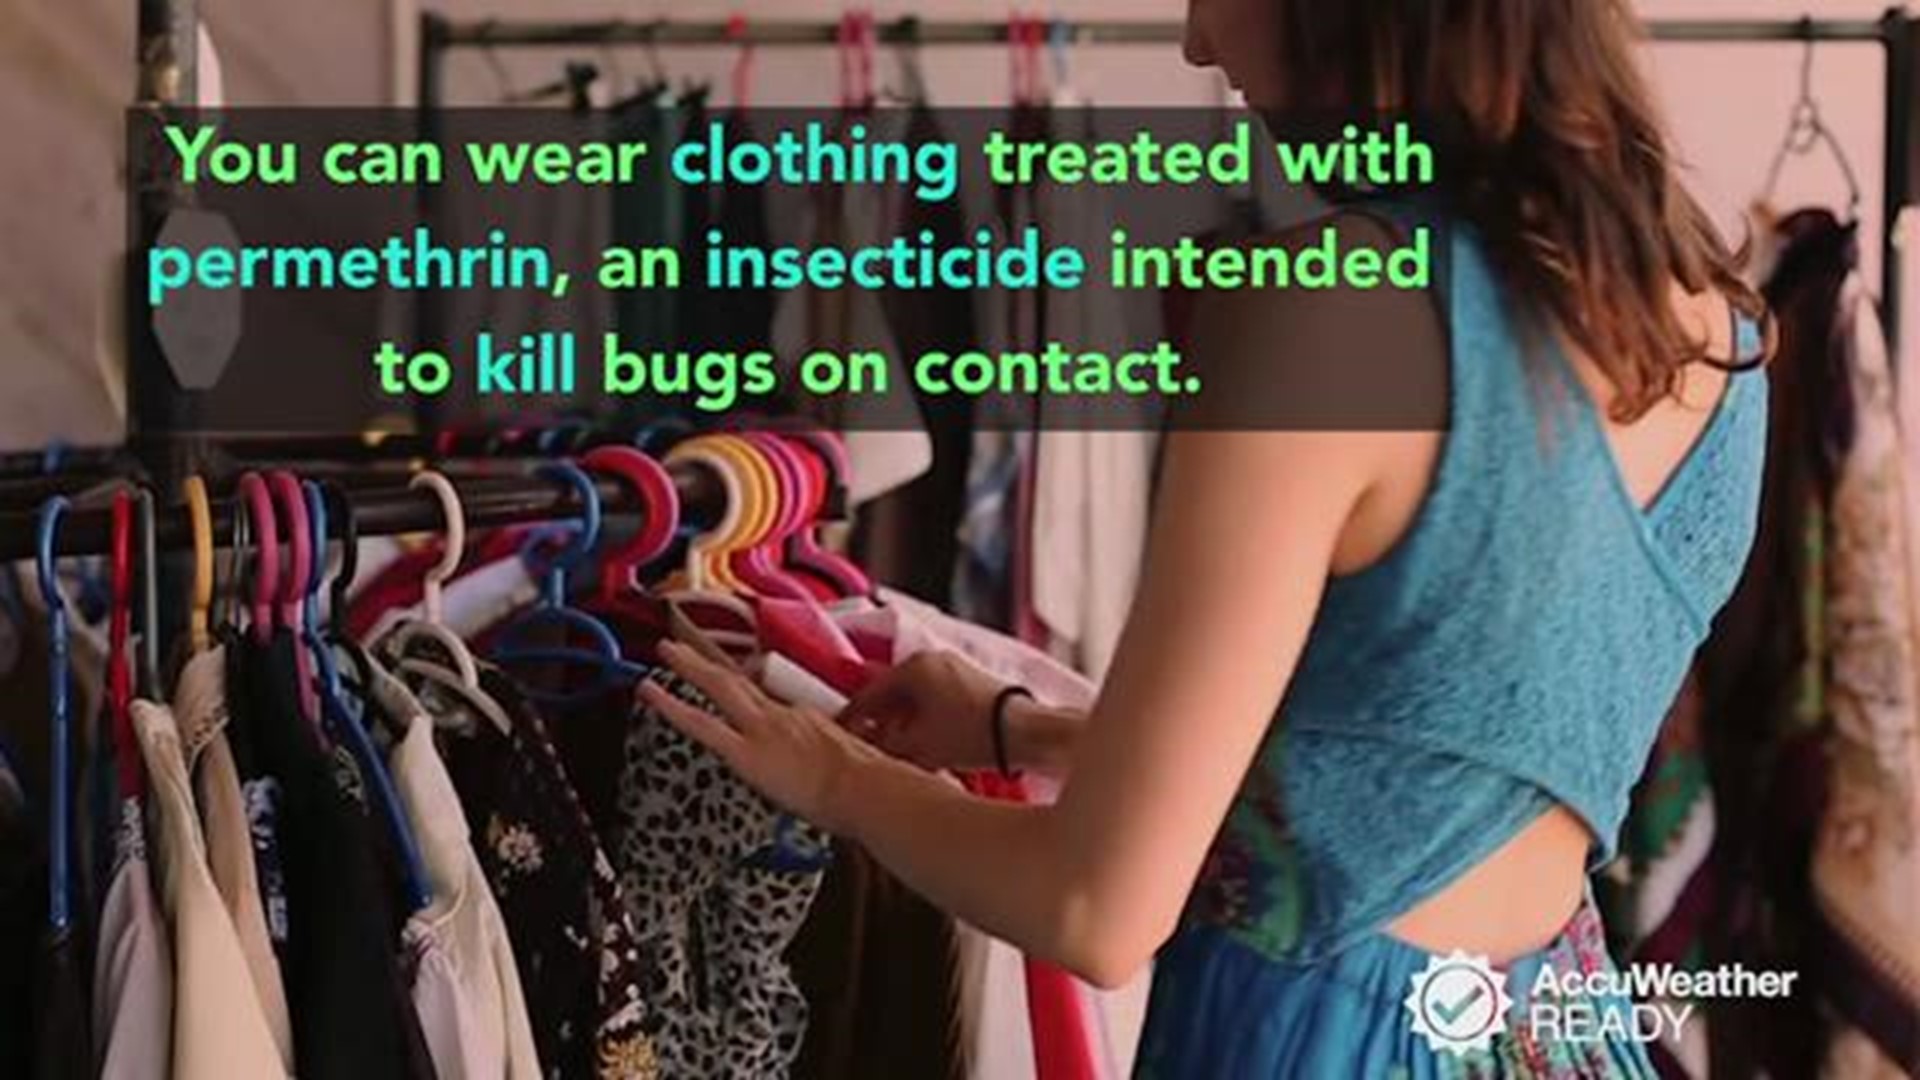 If you'd prefer not to use bug repellent sprays, there are other options available that might also be effective at warding off mosquitoes.